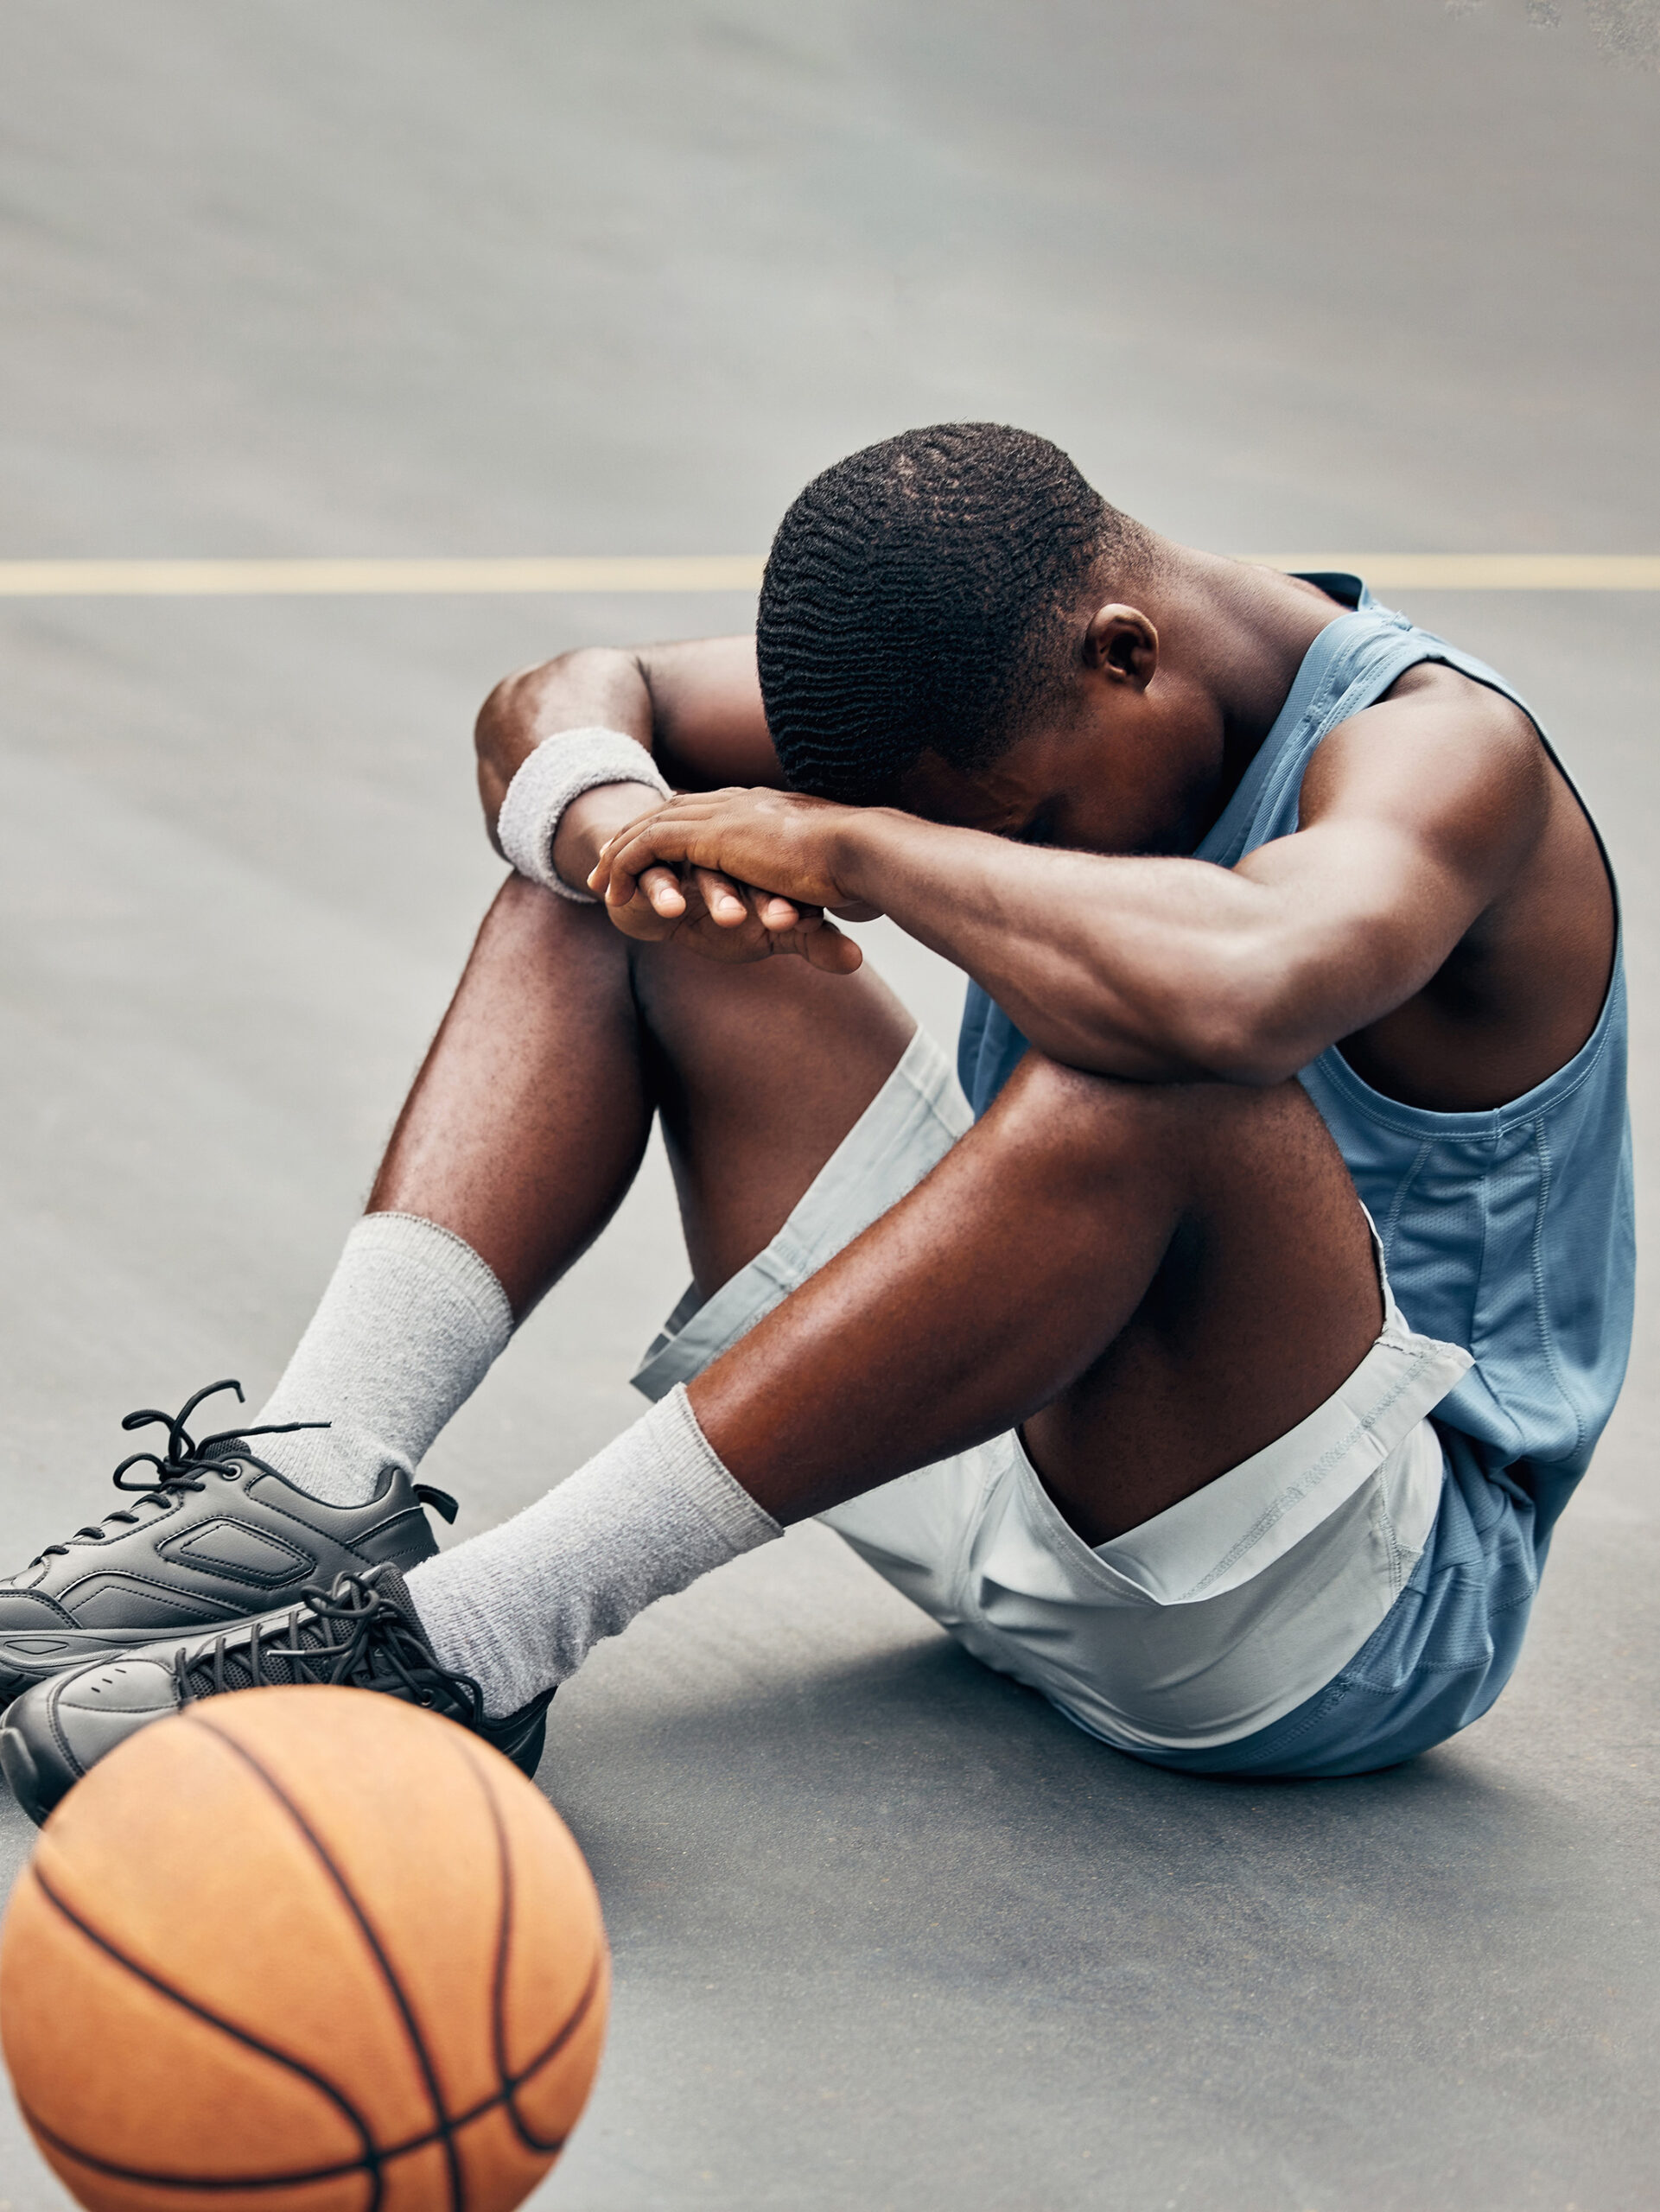 Young athlete puts head in hands while playing basketball - Tips for preventing athlete burnout from a CHOC Sports Medicine Physician